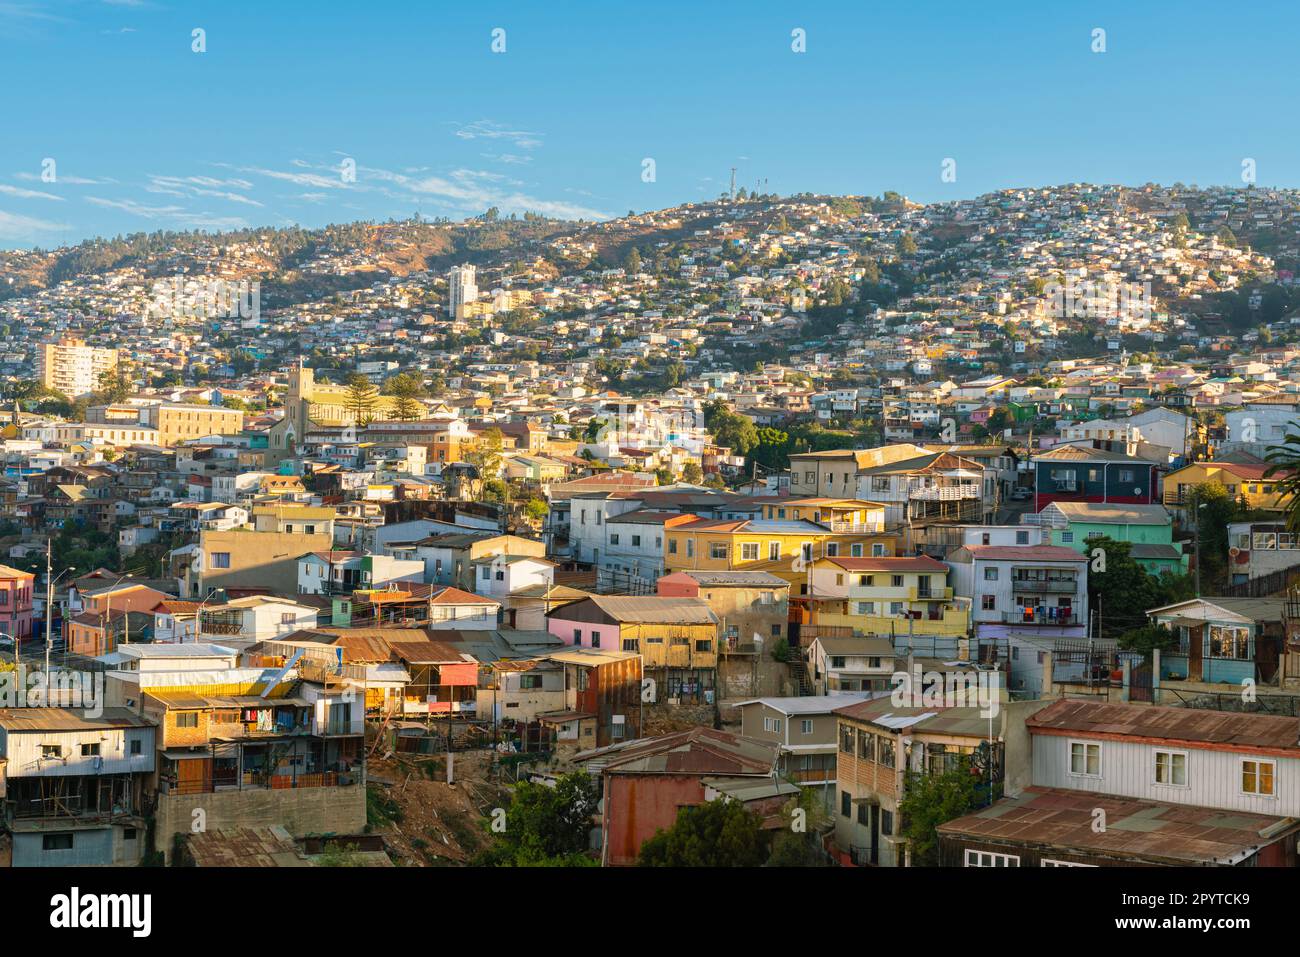 Residential buildings in Valparaiso, Chile Stock Photo